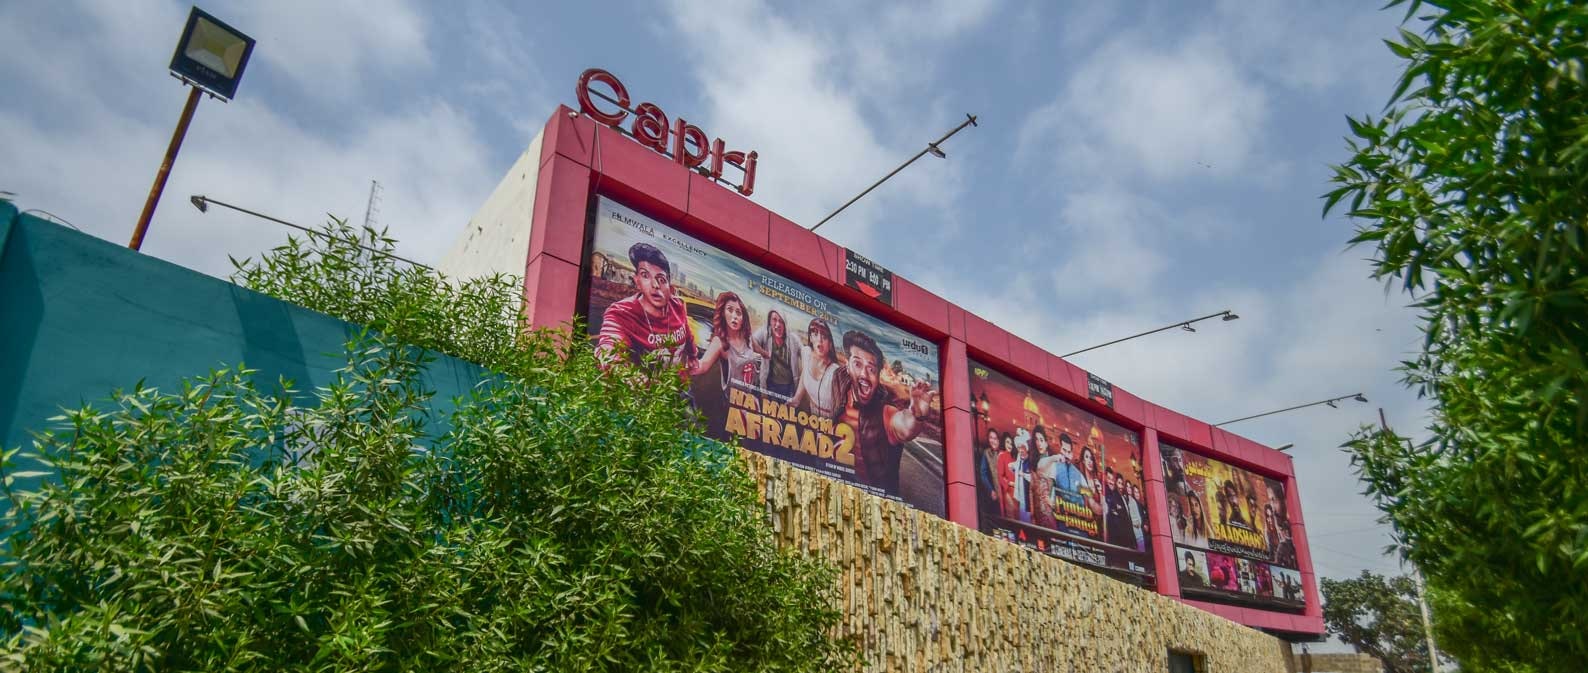 The pink facade of a cinema posted with three large colourful movie posters, surrounded by greenery.